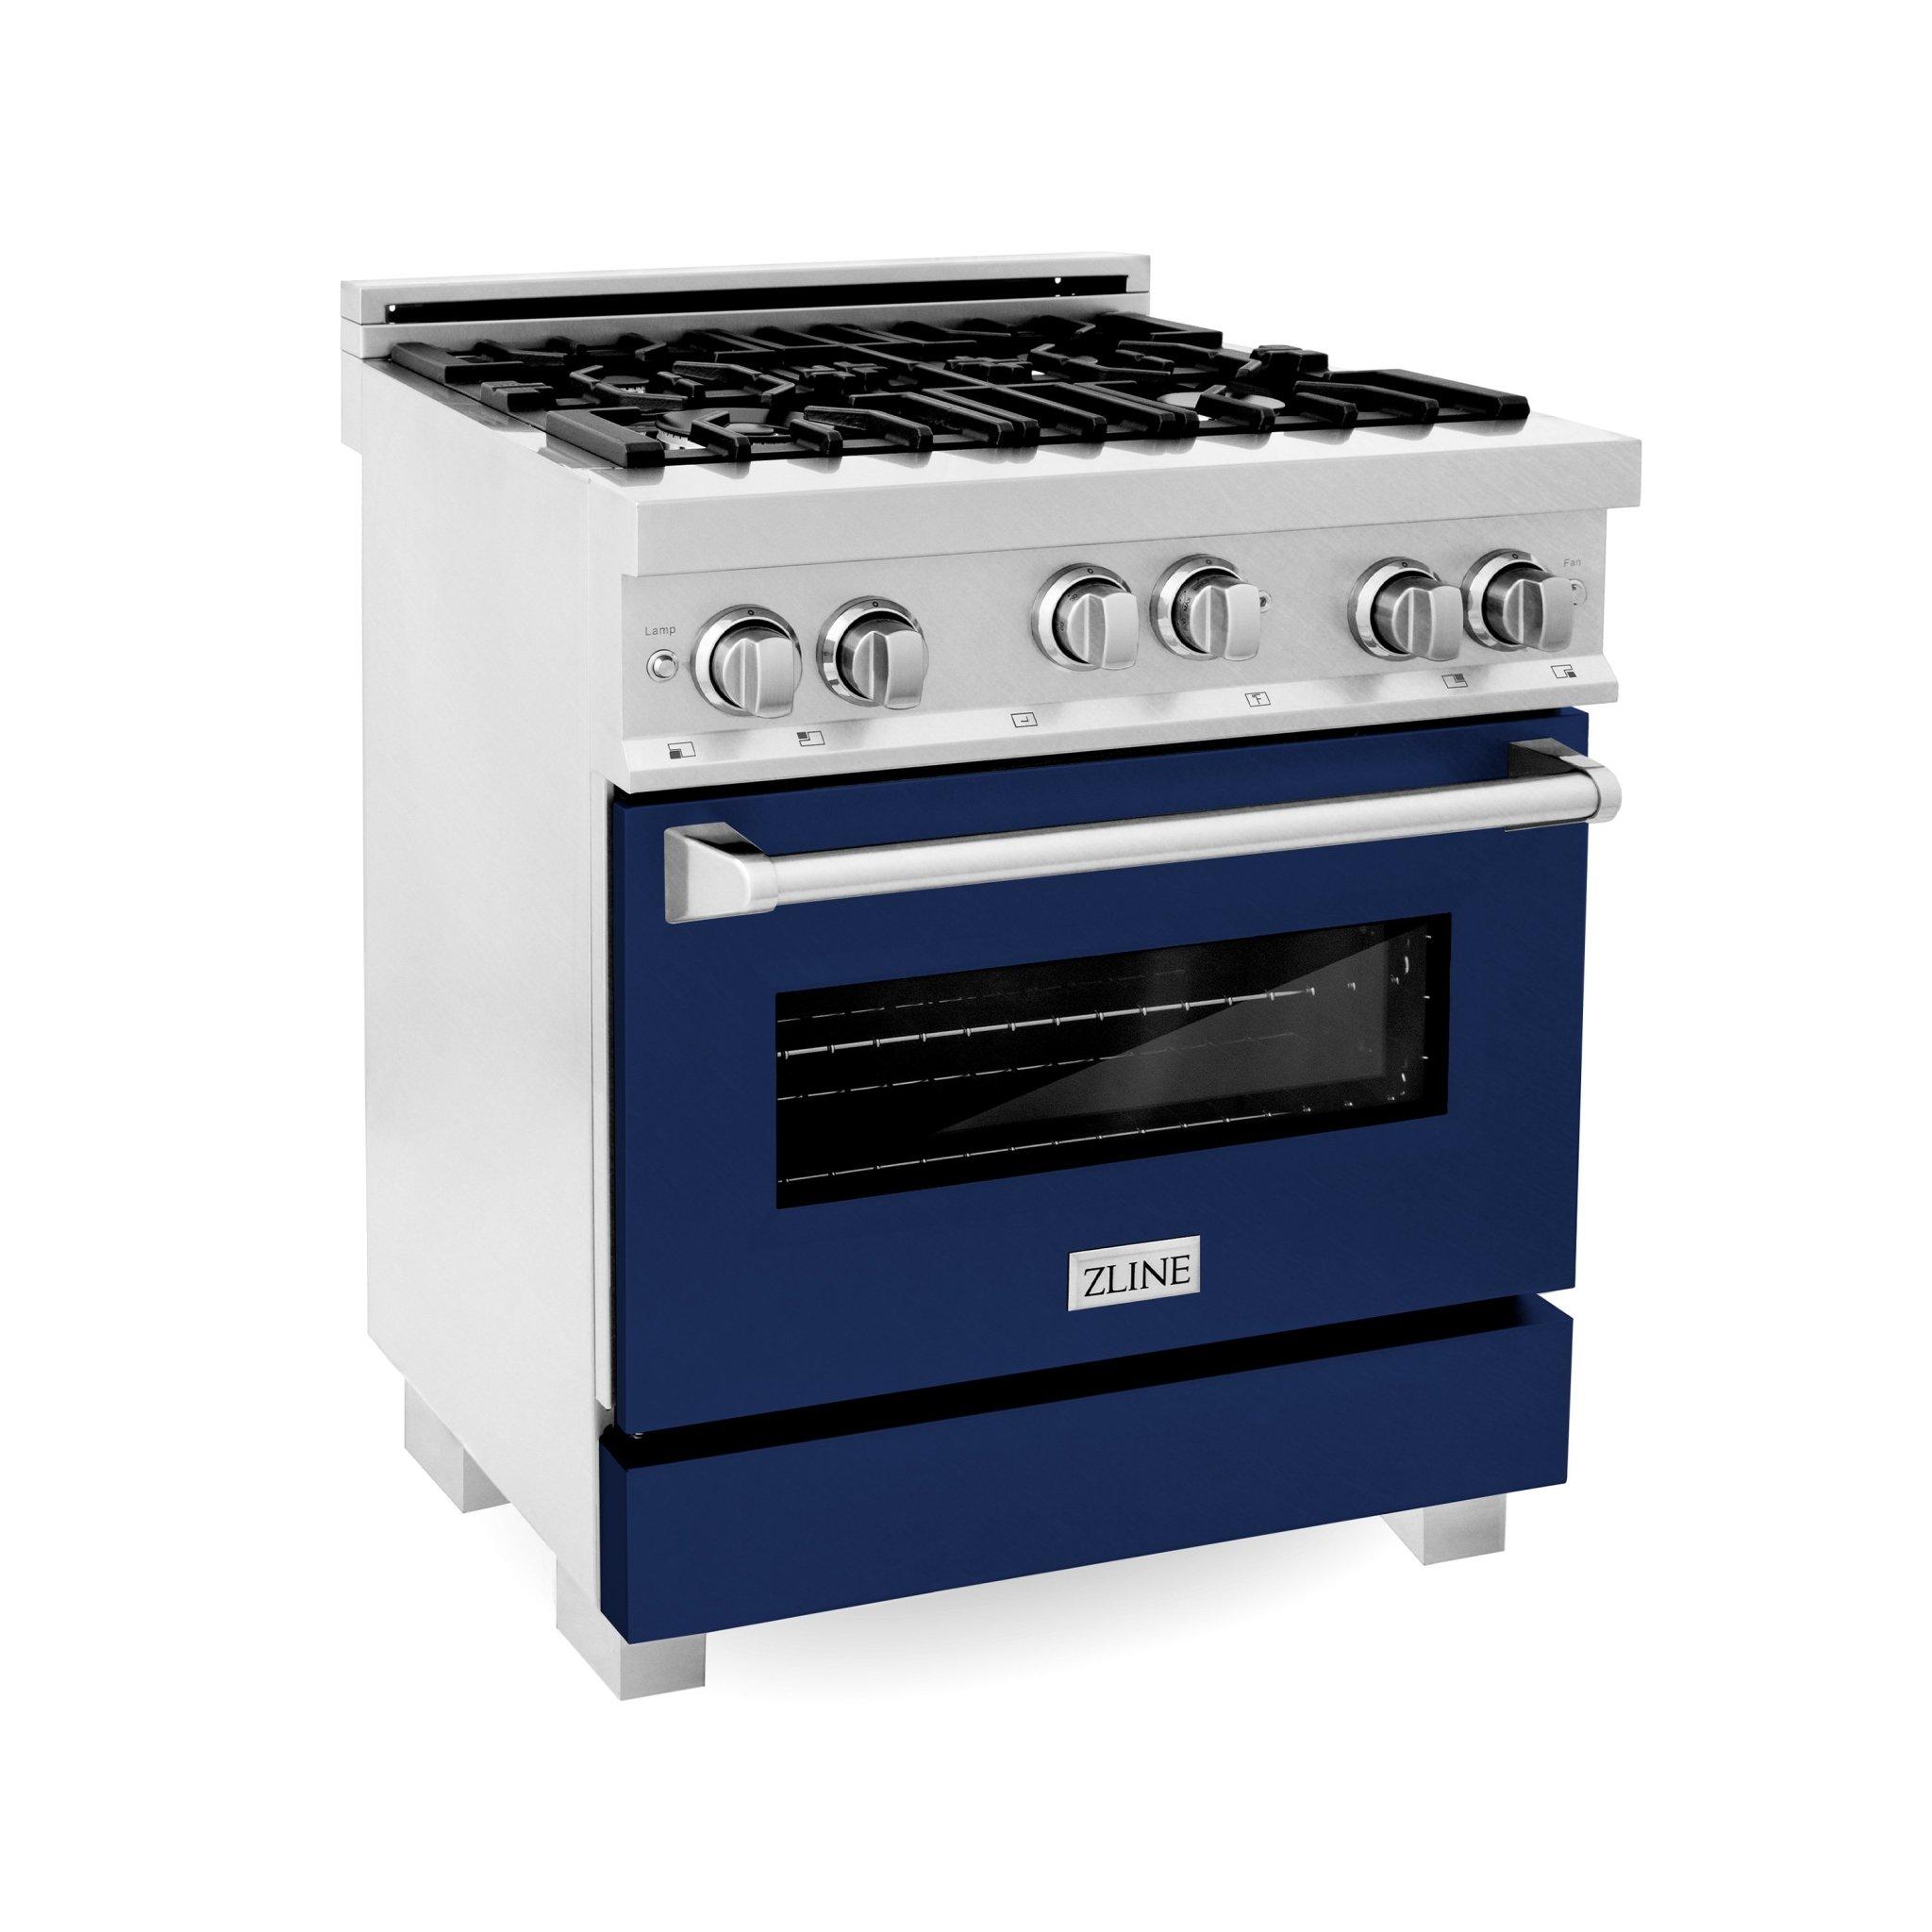 ZLINE KITCHEN AND BATH RGSSN30 ZLINE 30" 4.0 cu. ft. Range with Gas Stove and Gas Oven in DuraSnow R Stainless Steel with Color Door Options Color: DuraSnow R Stainless Steel